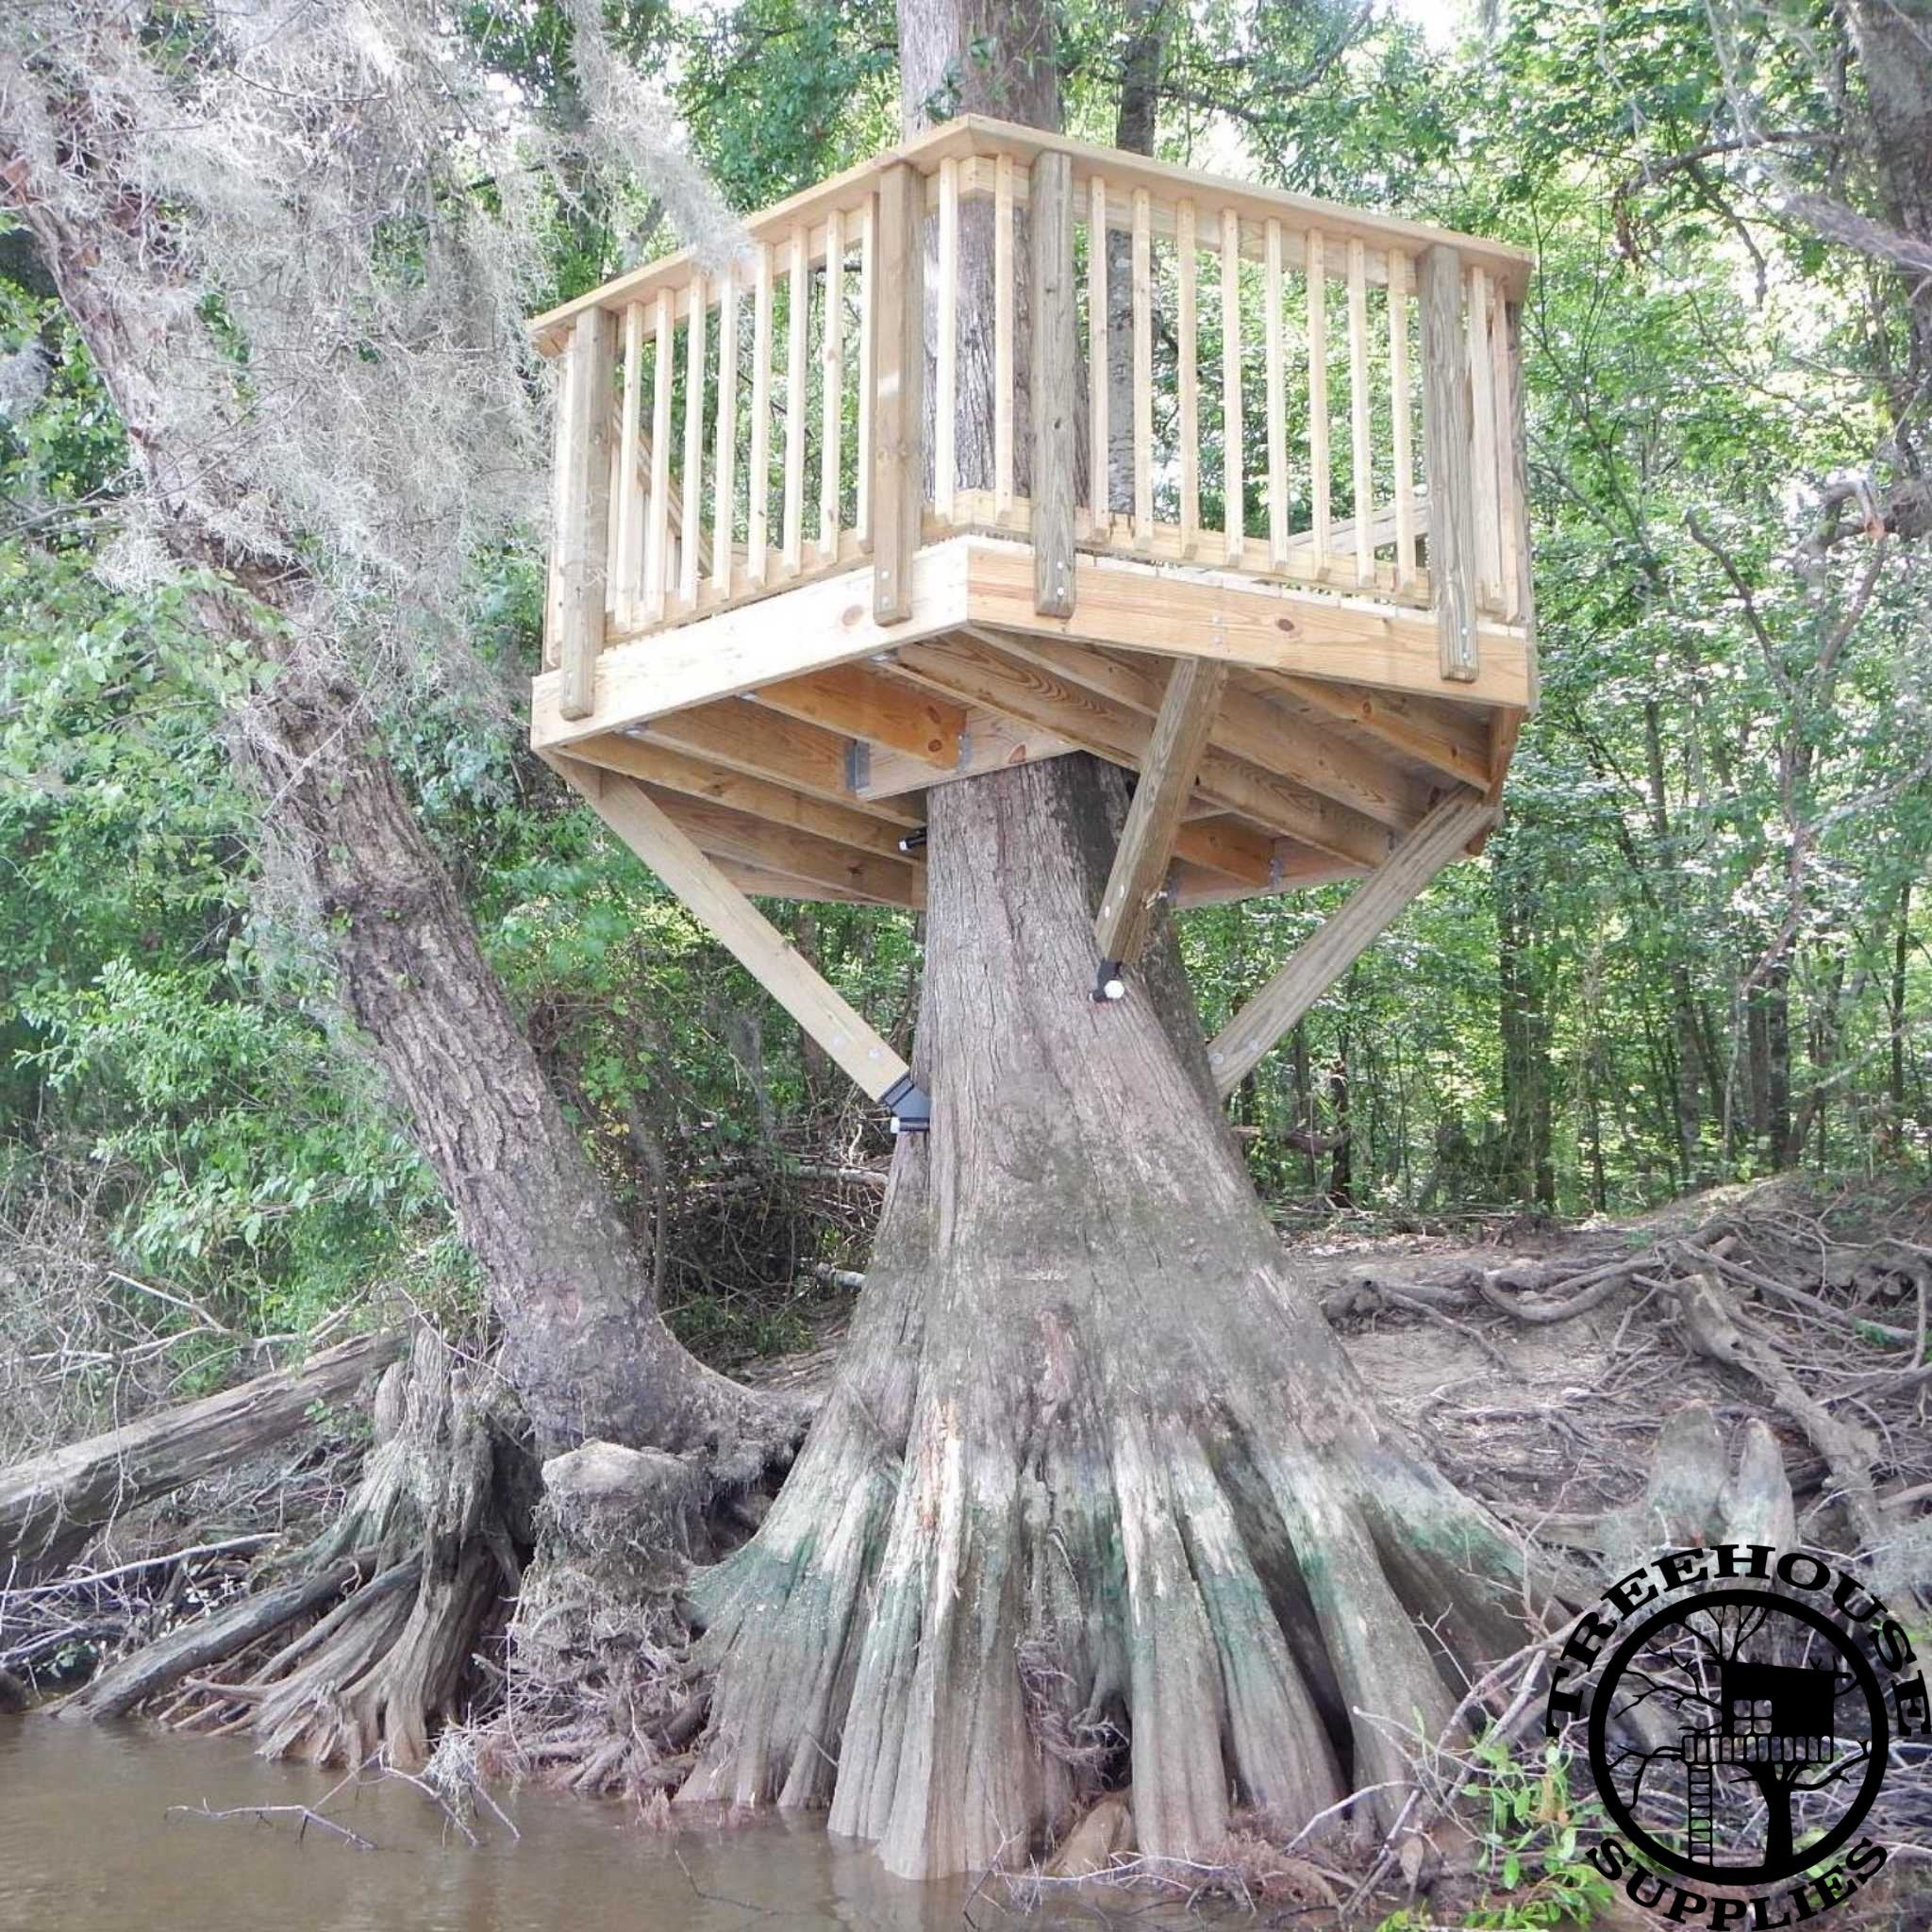 10' DIAMETER HEXAGONAL TREEHOUSE PLAN - NOW INCLUDES STEP-BY-STEP 3D MODELING!! - Treehouse Supplies